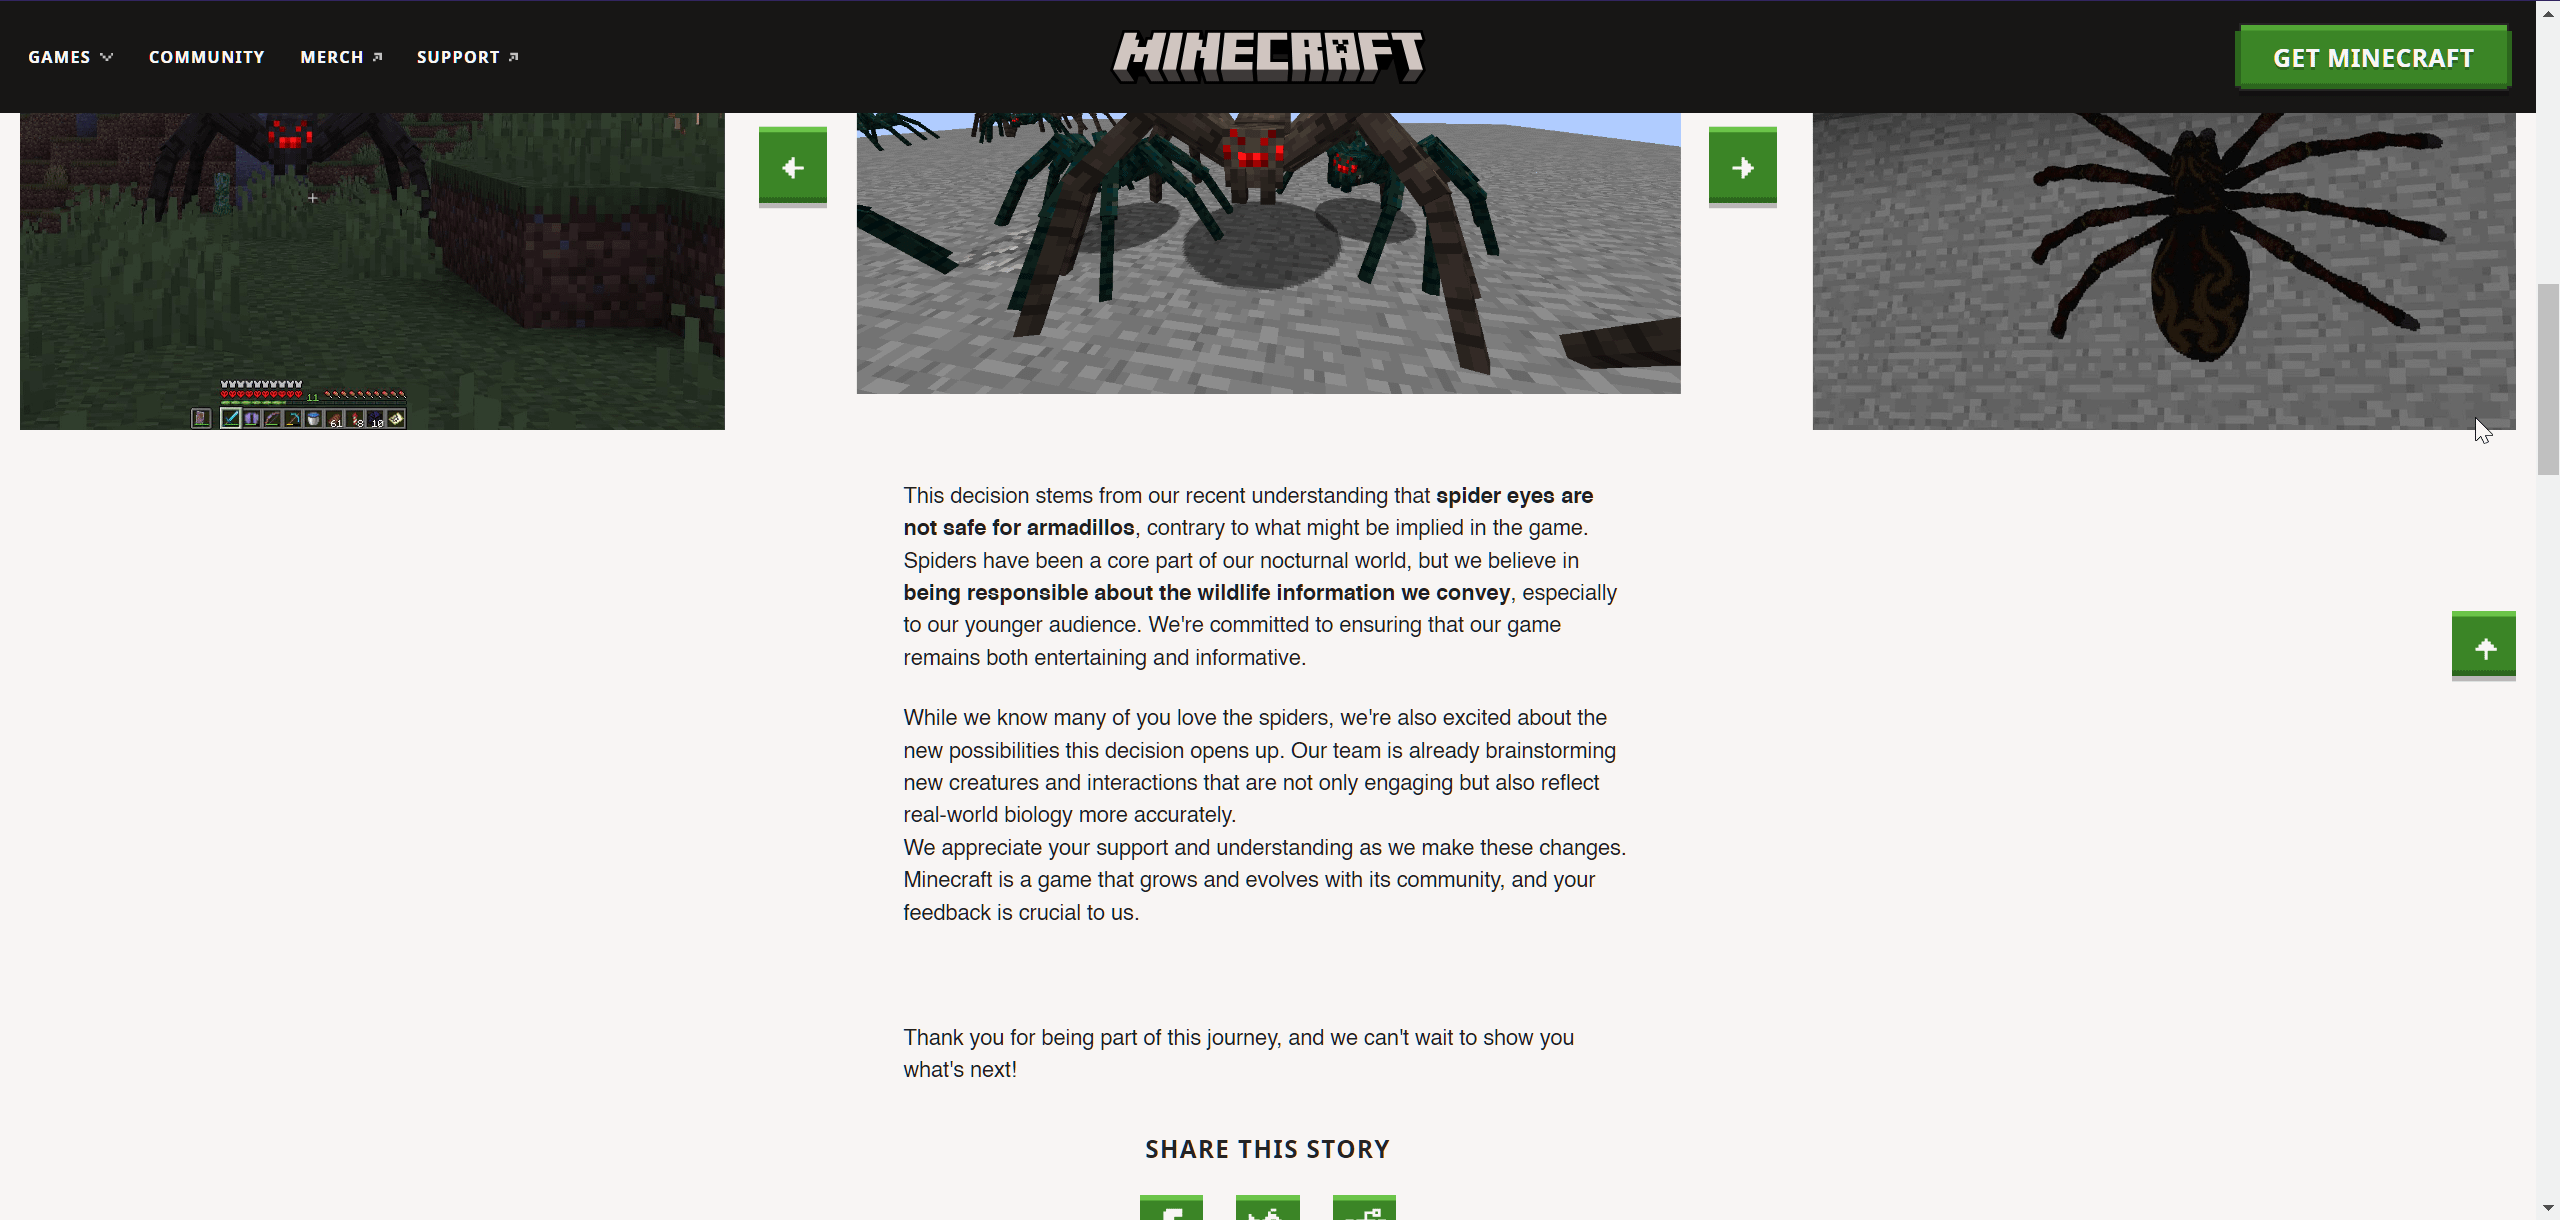 Minecraft Memes - "Sorry gamers, spiders are out... arachno-phobia activated"